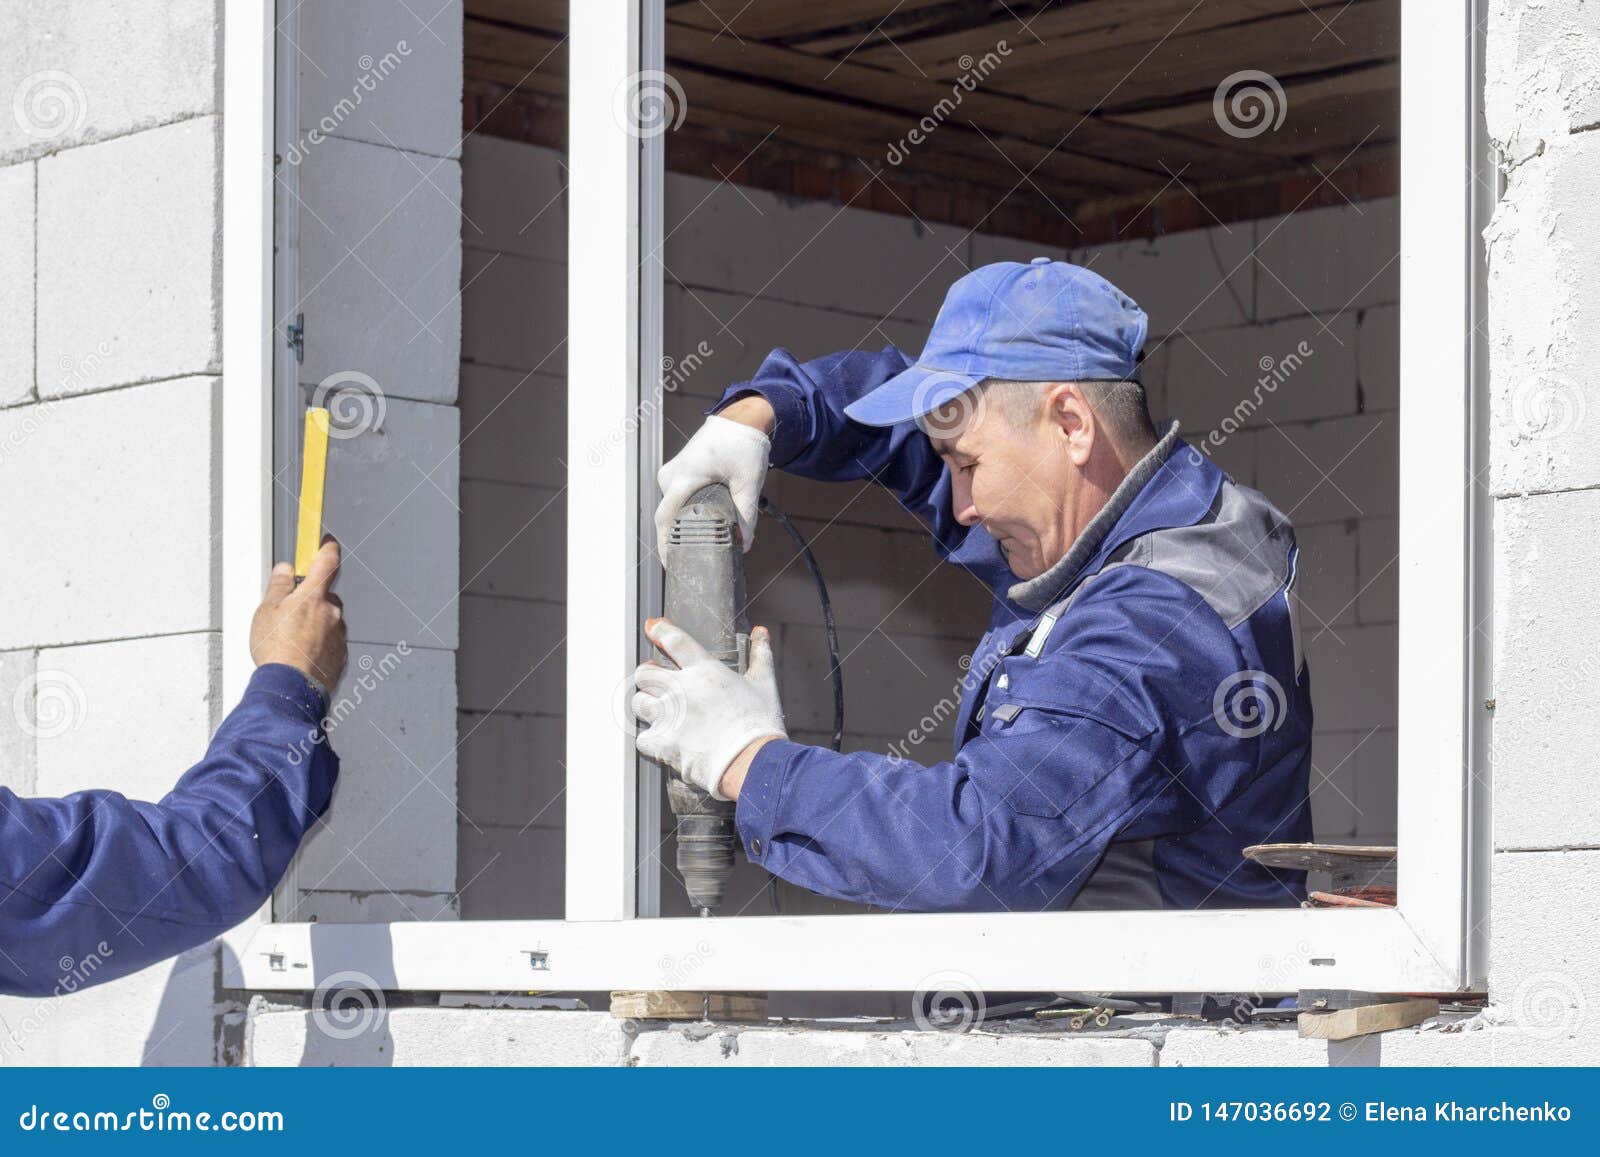 Asian Workers Install Windows To the House Stock Photo - Image of ...